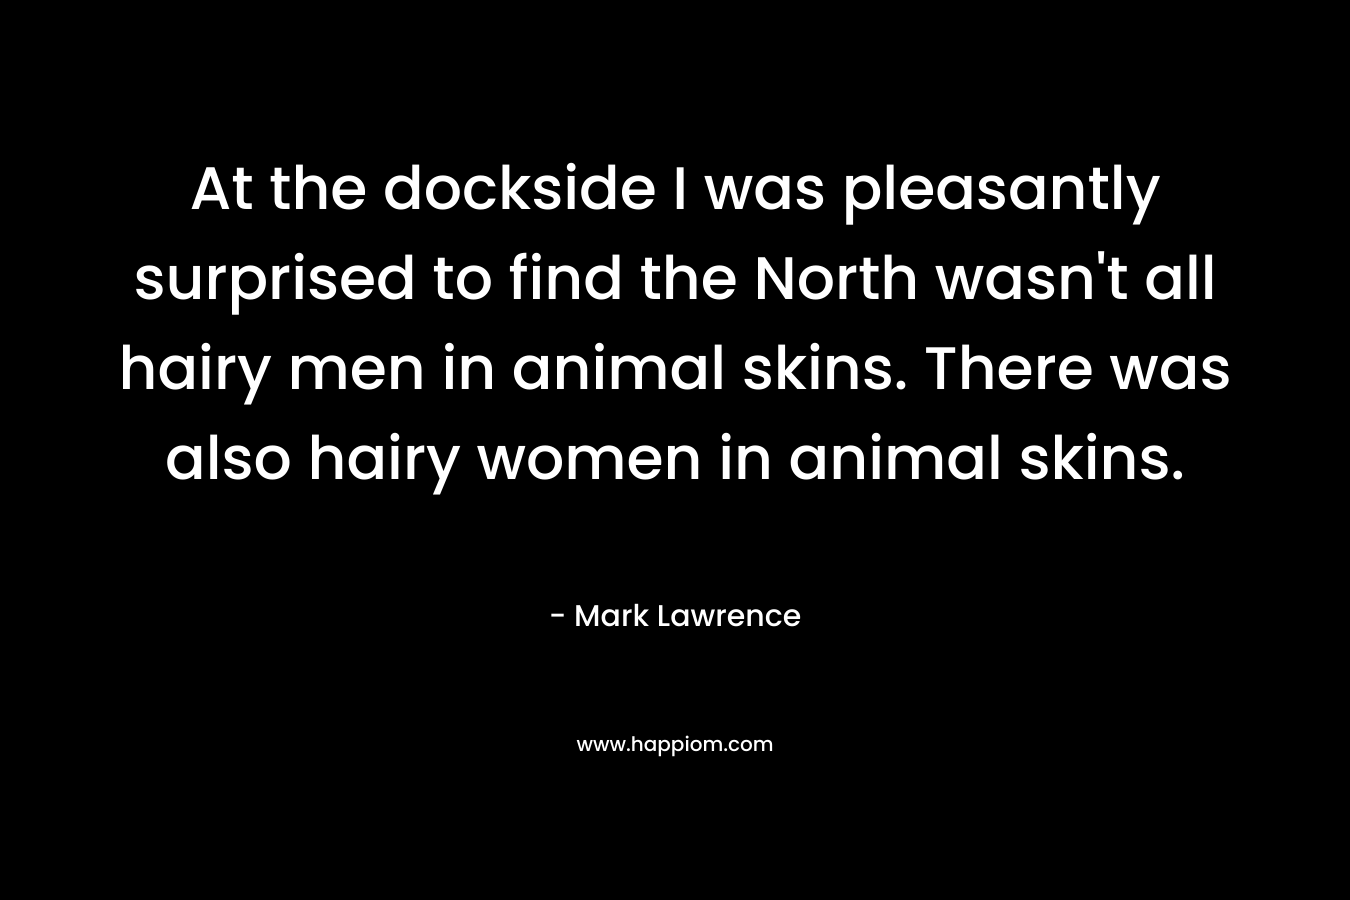 At the dockside I was pleasantly surprised to find the North wasn't all hairy men in animal skins. There was also hairy women in animal skins.